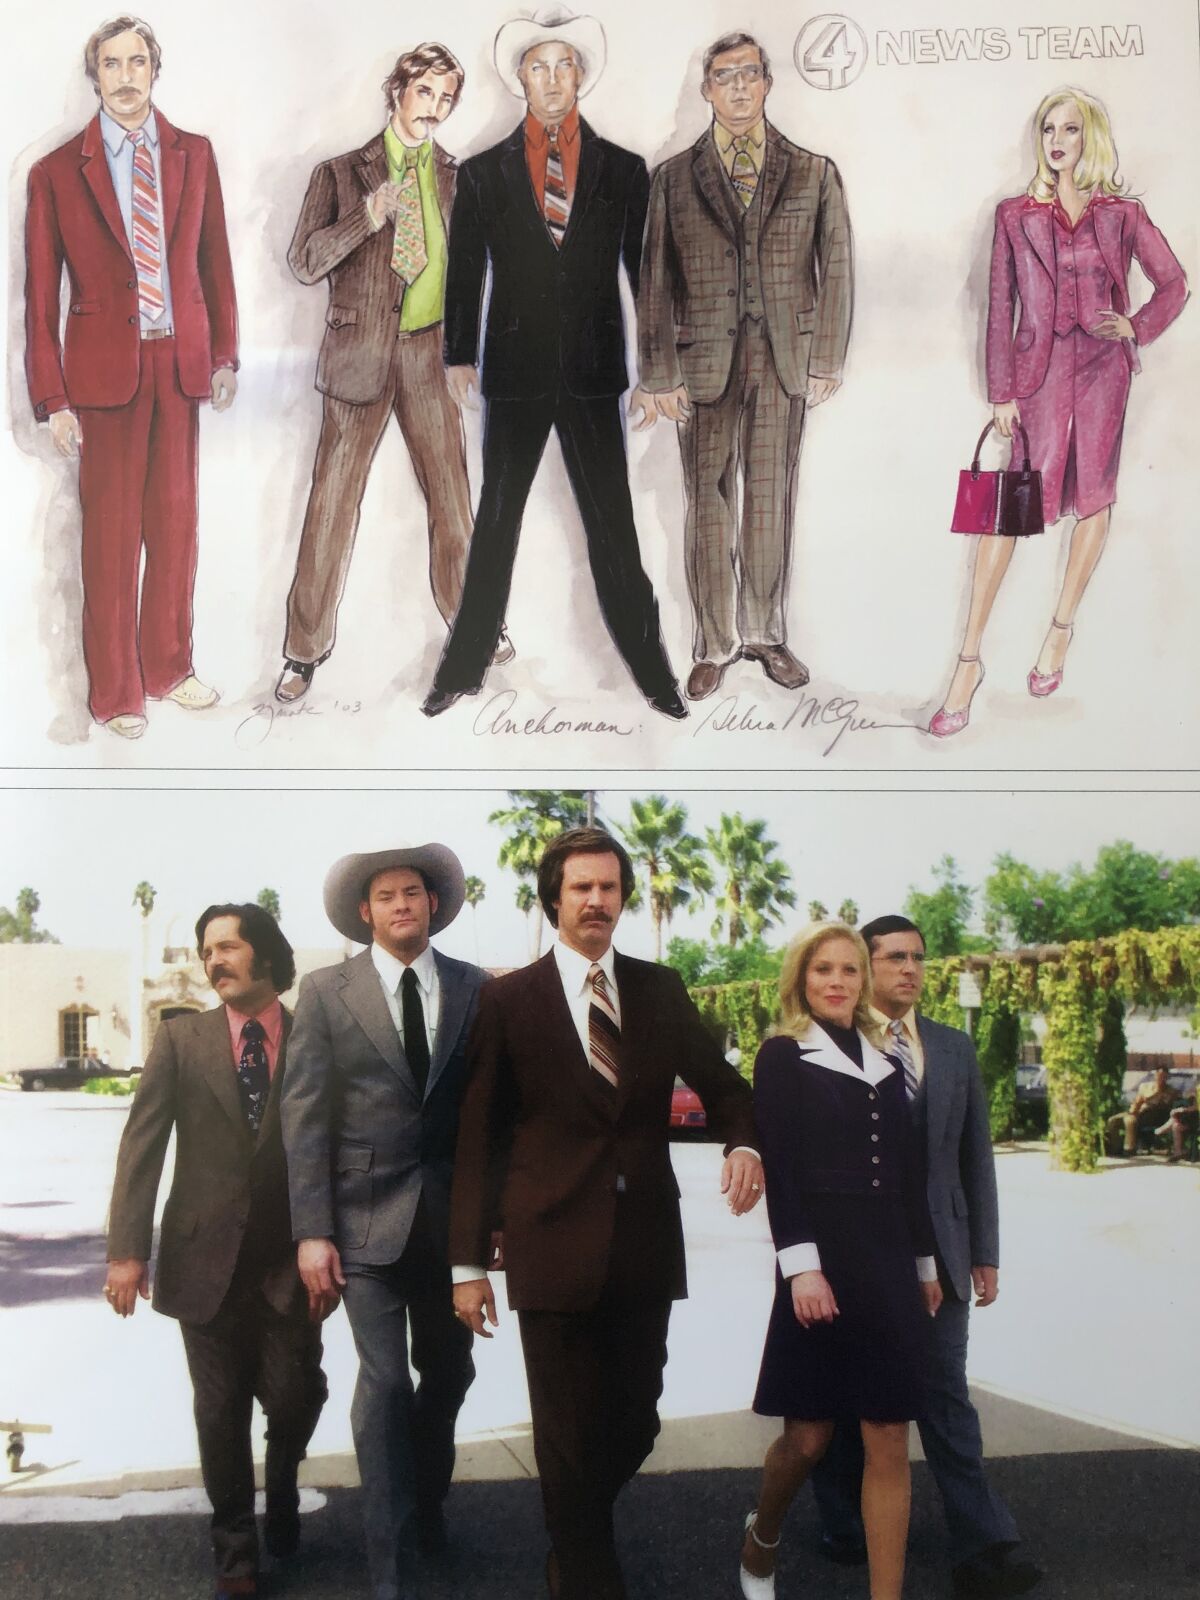 Sketches for colorful costumes for the movie "Anchorman" on top half, bottom half a still from the film.